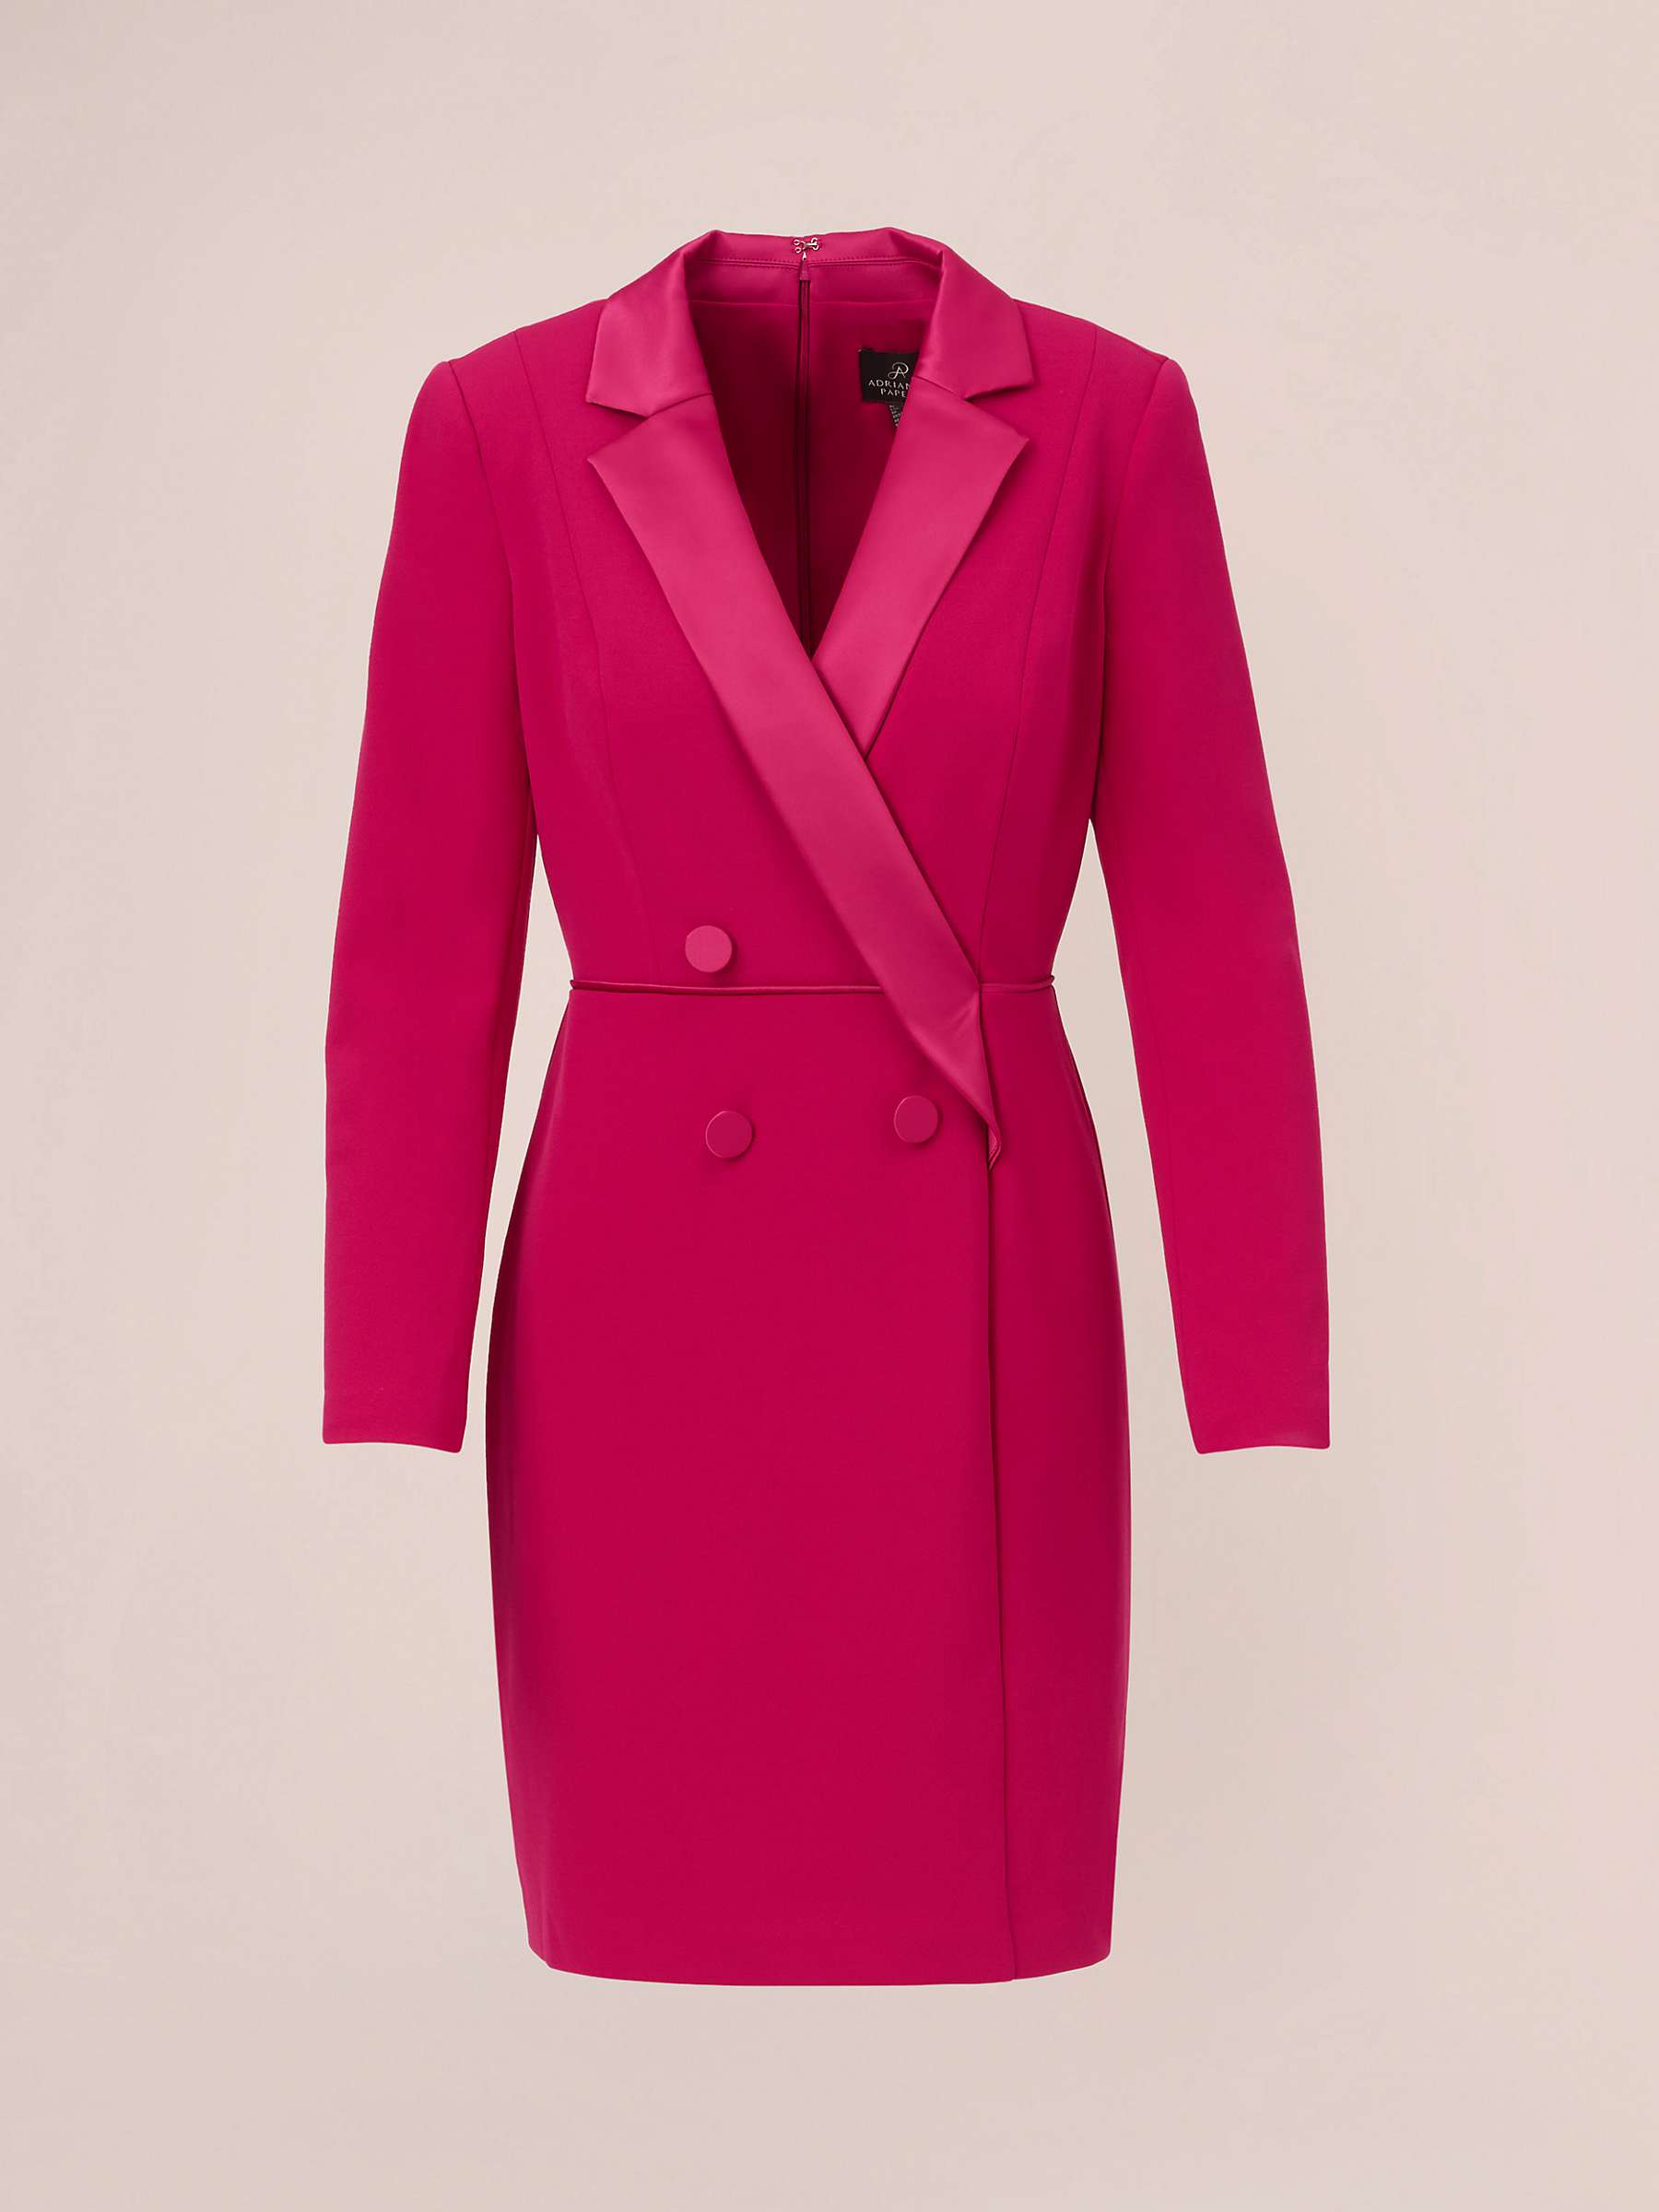 Buy Adrianna Papell Crepe Tuxedo Dress, Rich Magenta Online at johnlewis.com